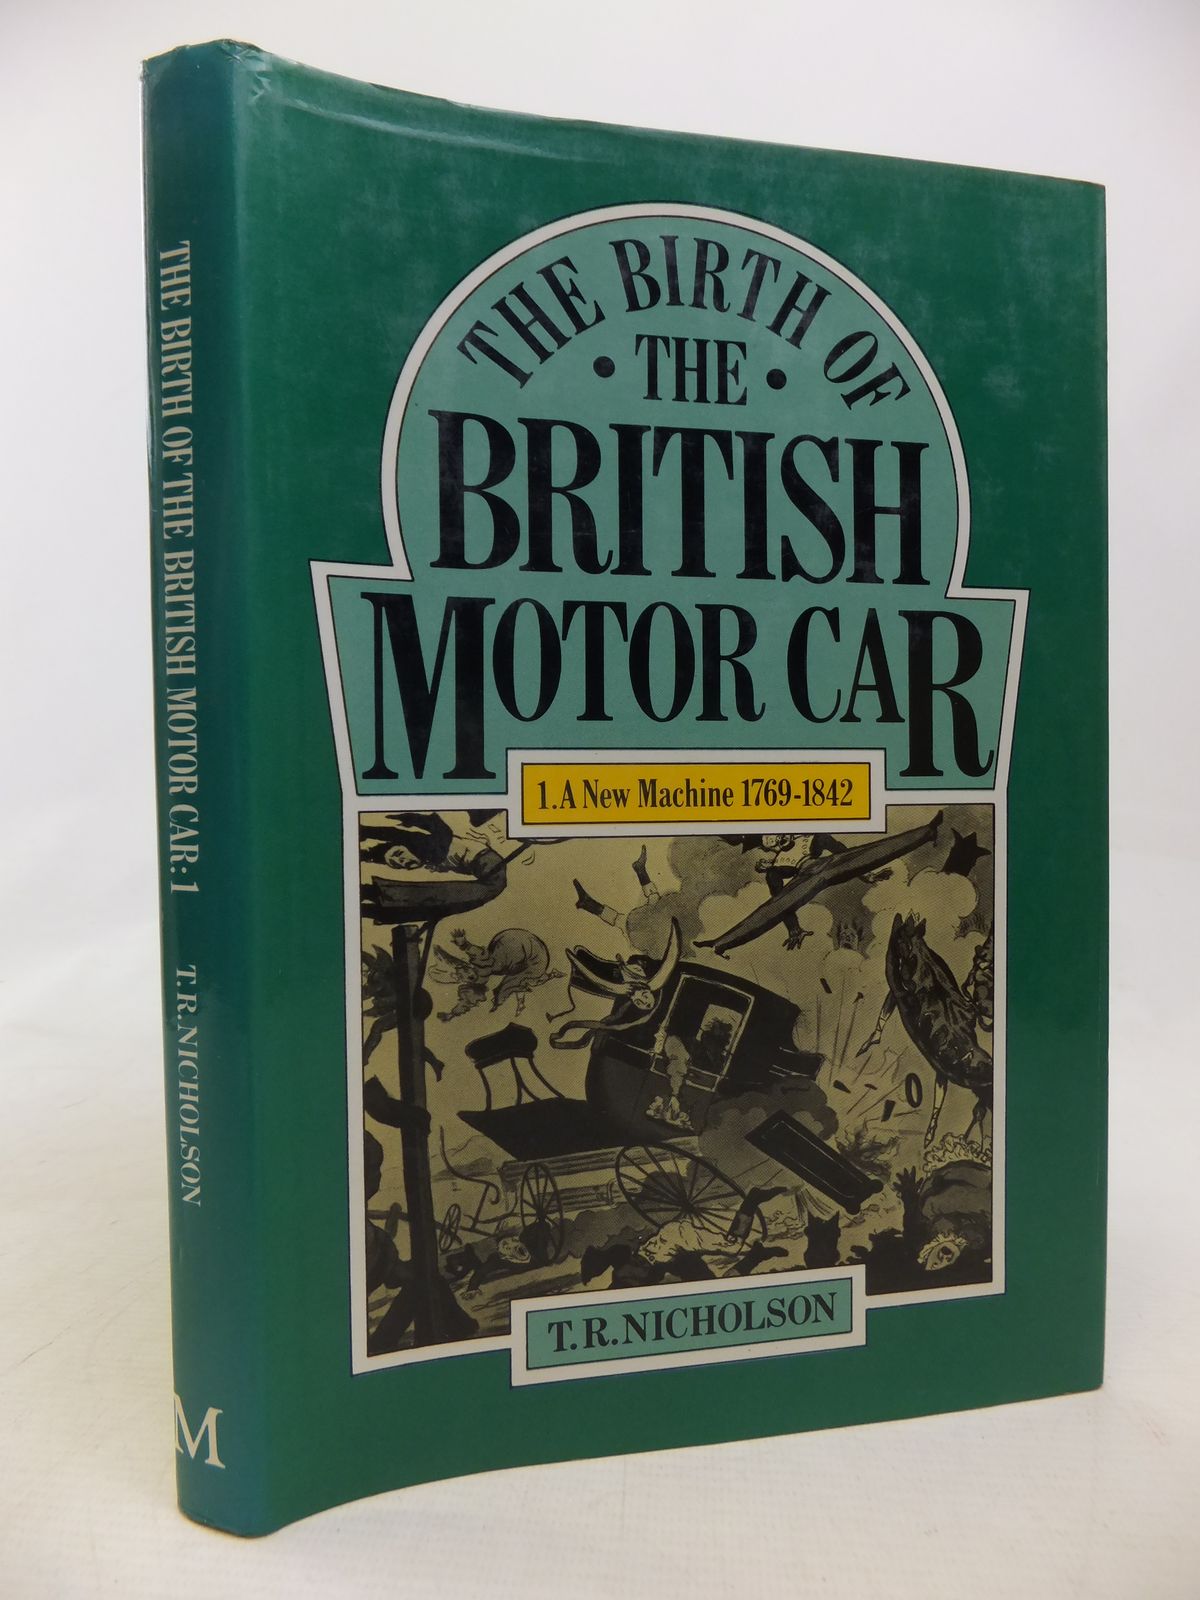 Photo of THE BIRTH OF THE BRITISH MOTOR CAR VOLUME 1 A NEW MACHINE 1769-1842 written by Nicholson, T.R. published by MacMillan (STOCK CODE: 1809963)  for sale by Stella & Rose's Books